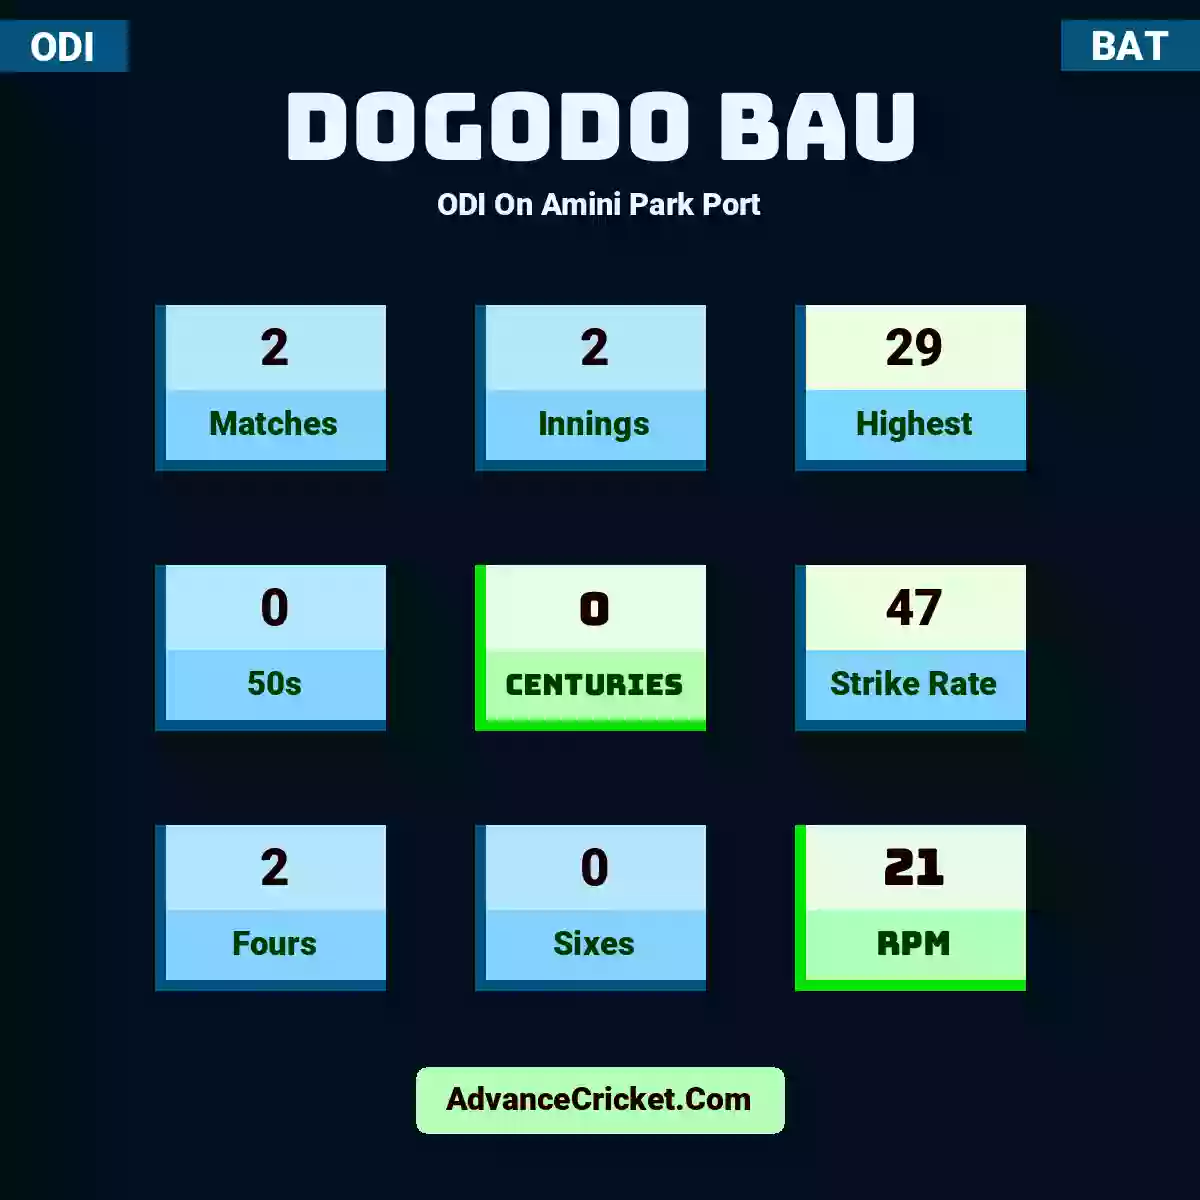 Dogodo Bau ODI  On Amini Park Port, Dogodo Bau played 2 matches, scored 29 runs as highest, 0 half-centuries, and 0 centuries, with a strike rate of 47. D.Bau hit 2 fours and 0 sixes, with an RPM of 21.